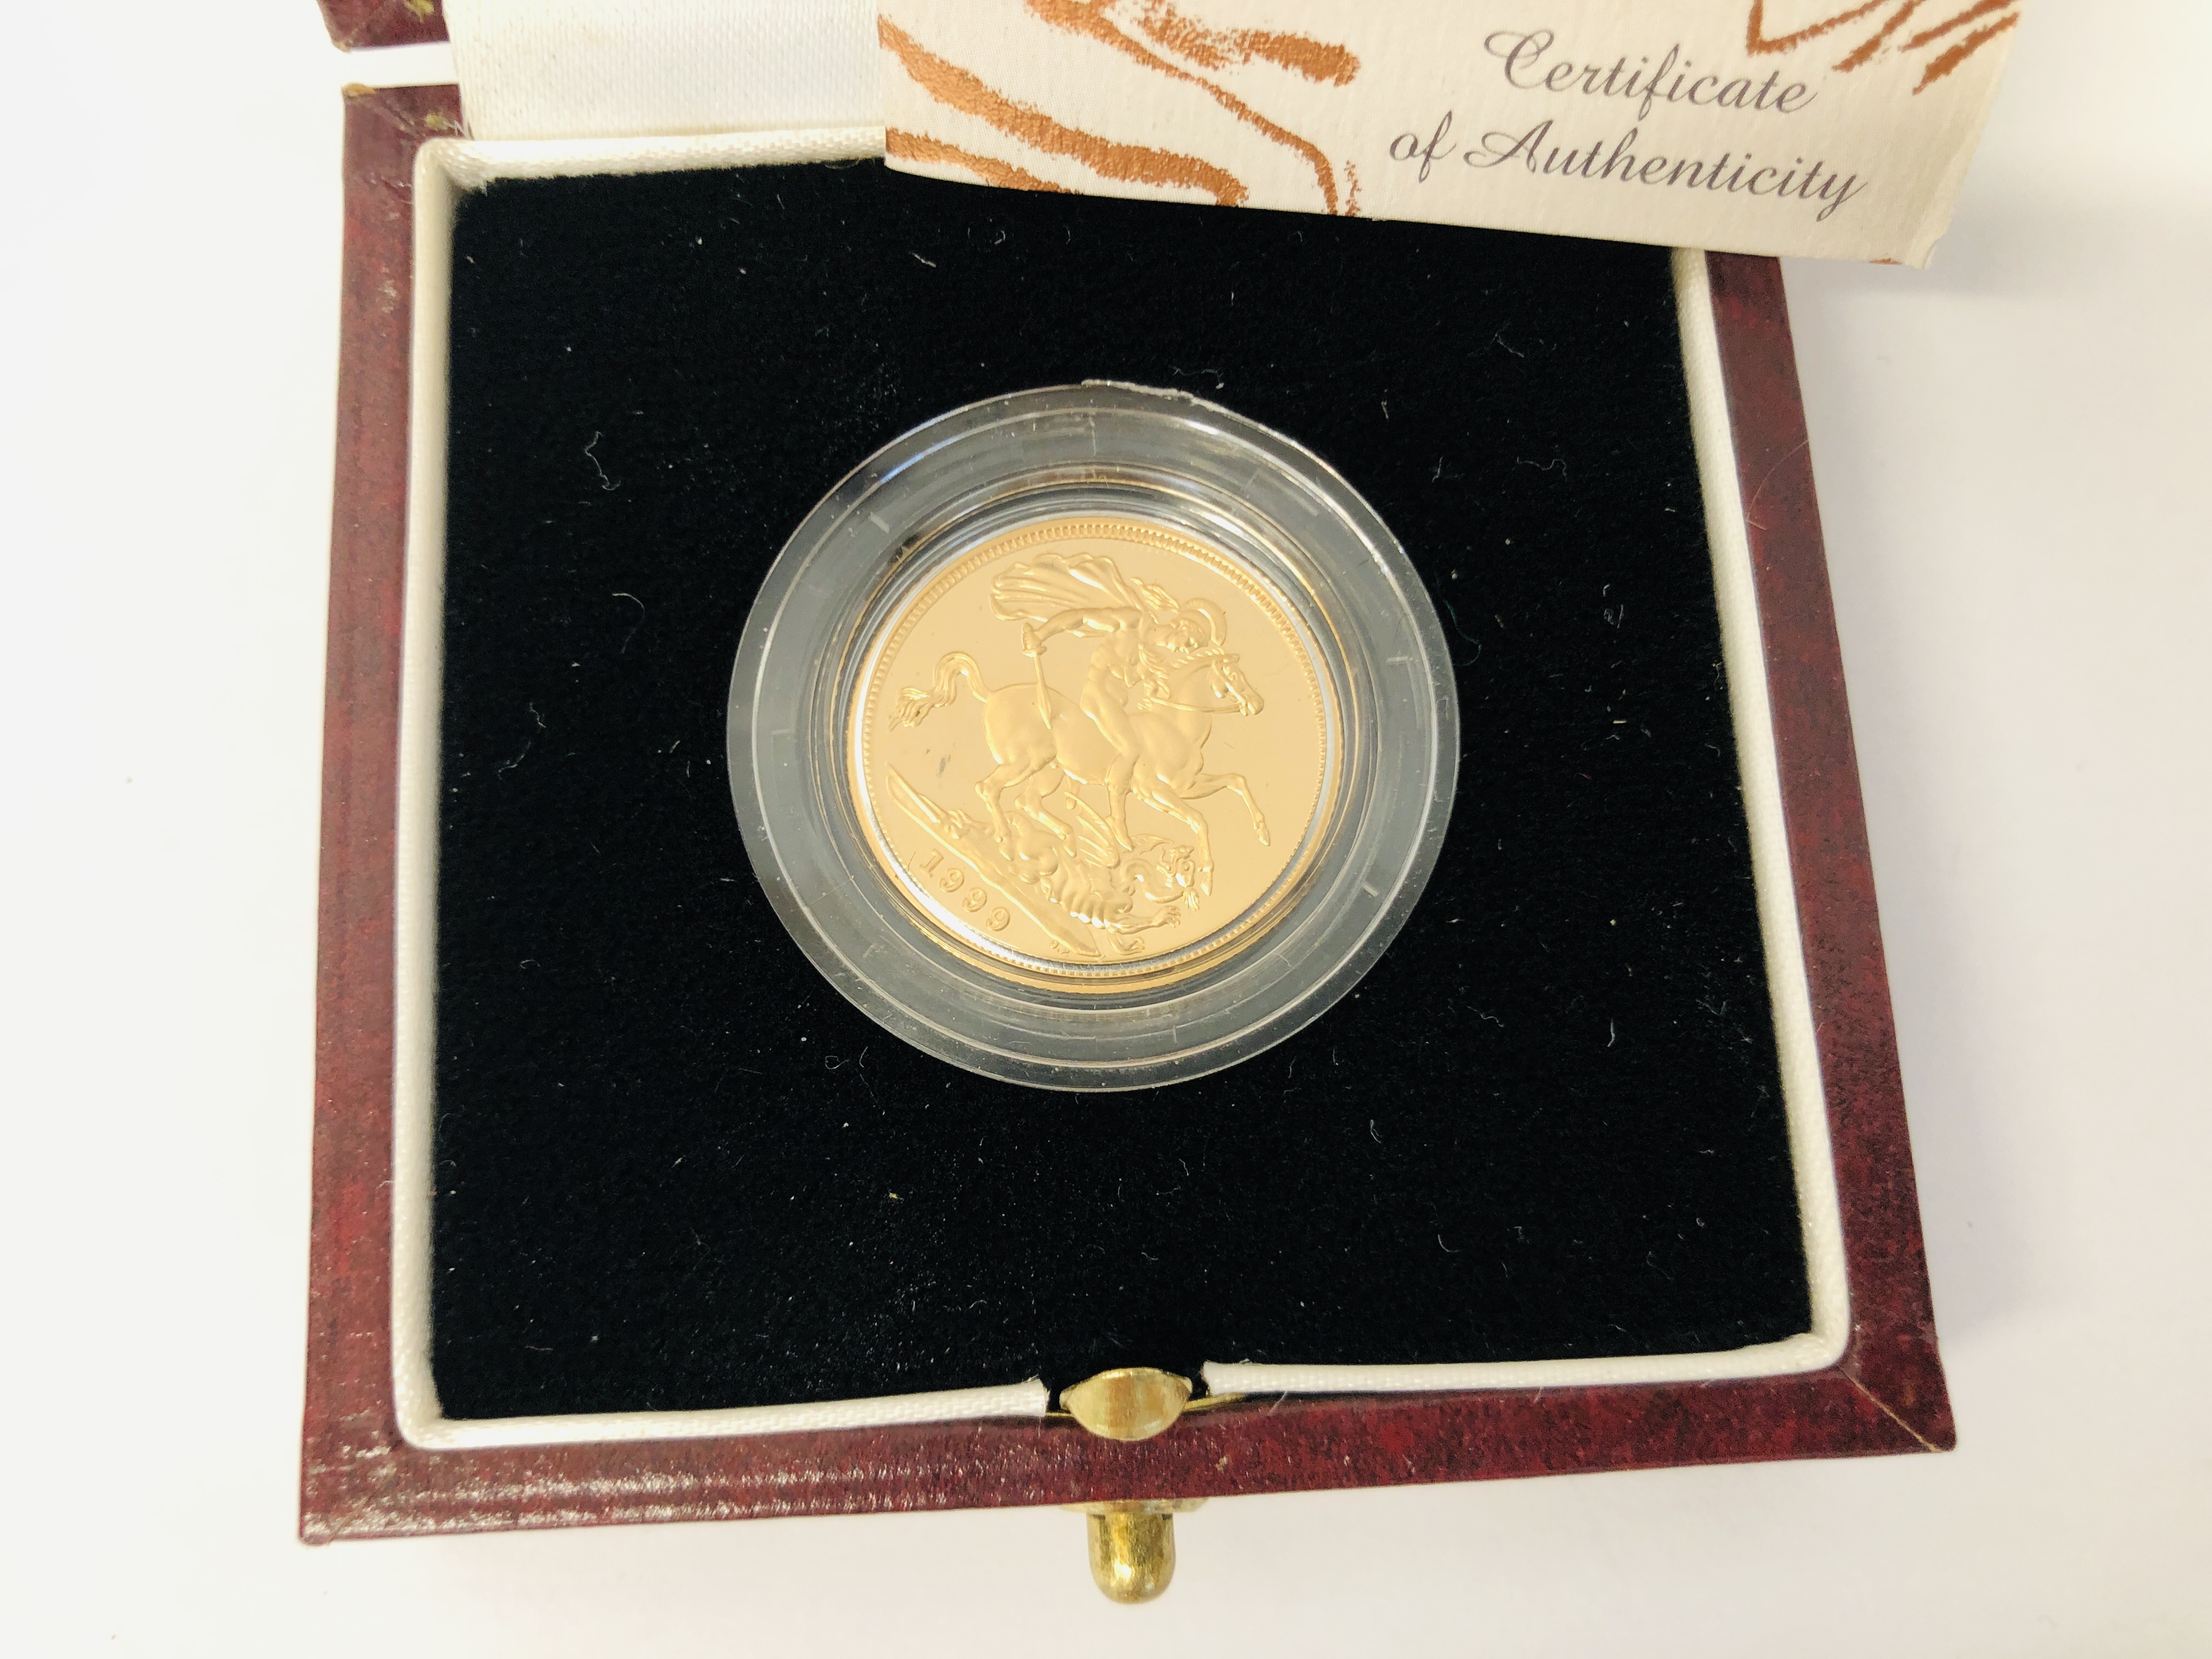 1999 GOLD PROOF SOVEREIGN IN PRESENTATION BOX WITH LTD EDITION CERTIFICATE OF AUTHENTICITY. - Bild 2 aus 5